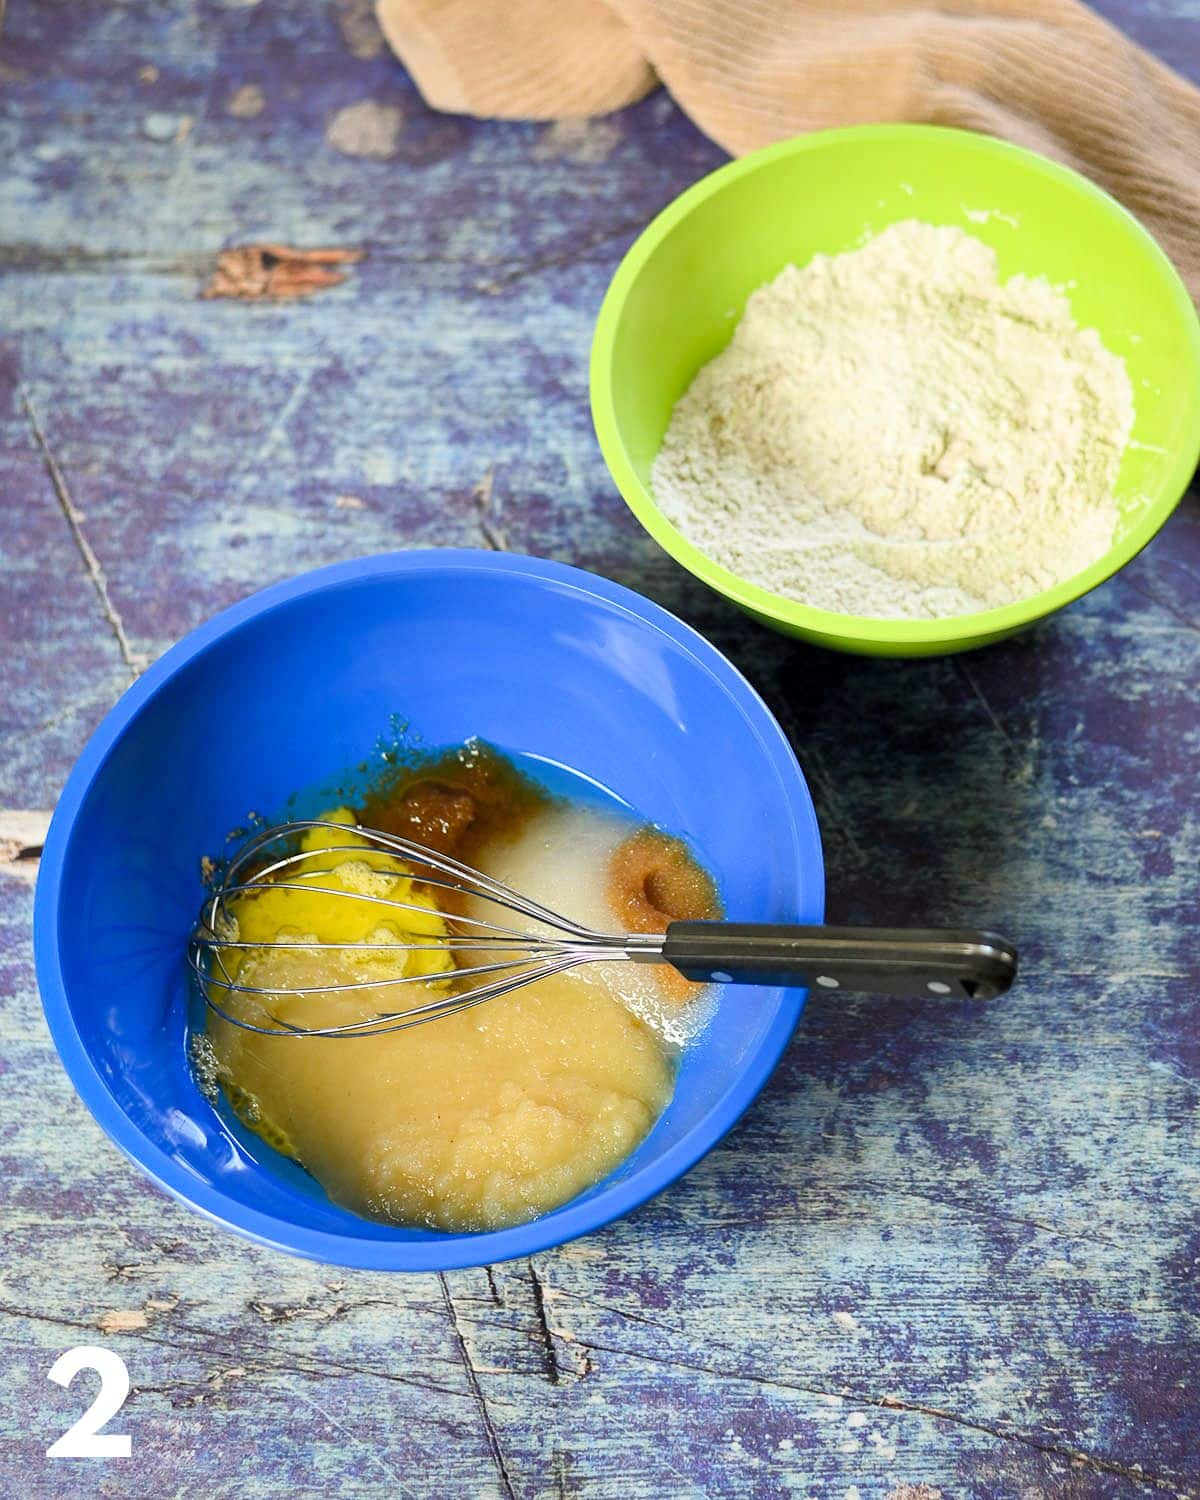 Applesauce and other wet ingredients in a blue bowl for cake batter.